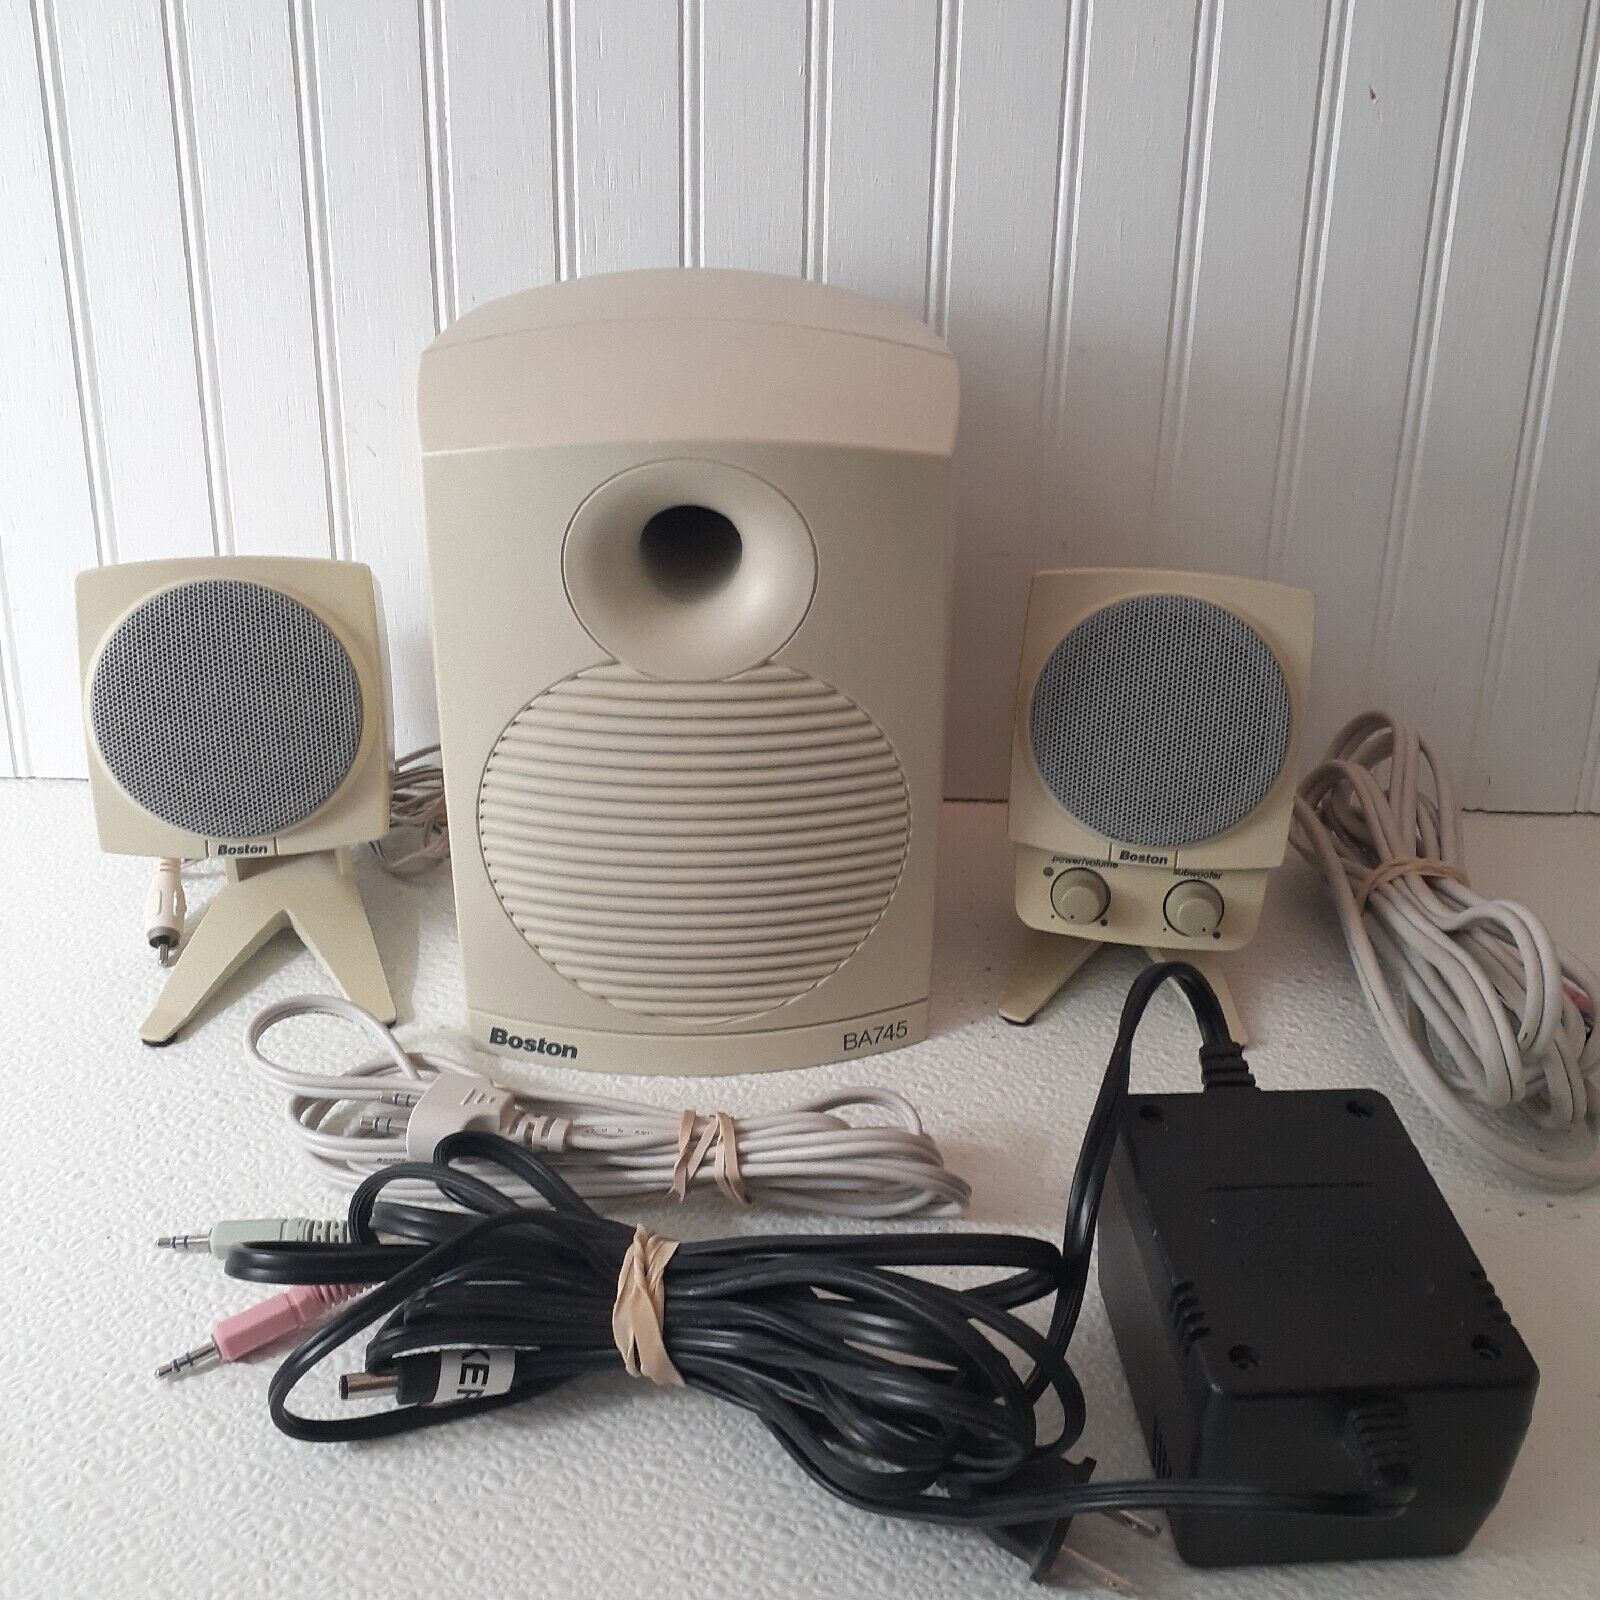 Vintage Bouston Acoustic BA745 Computer Speakers With Subwoofer And 2 Speakers